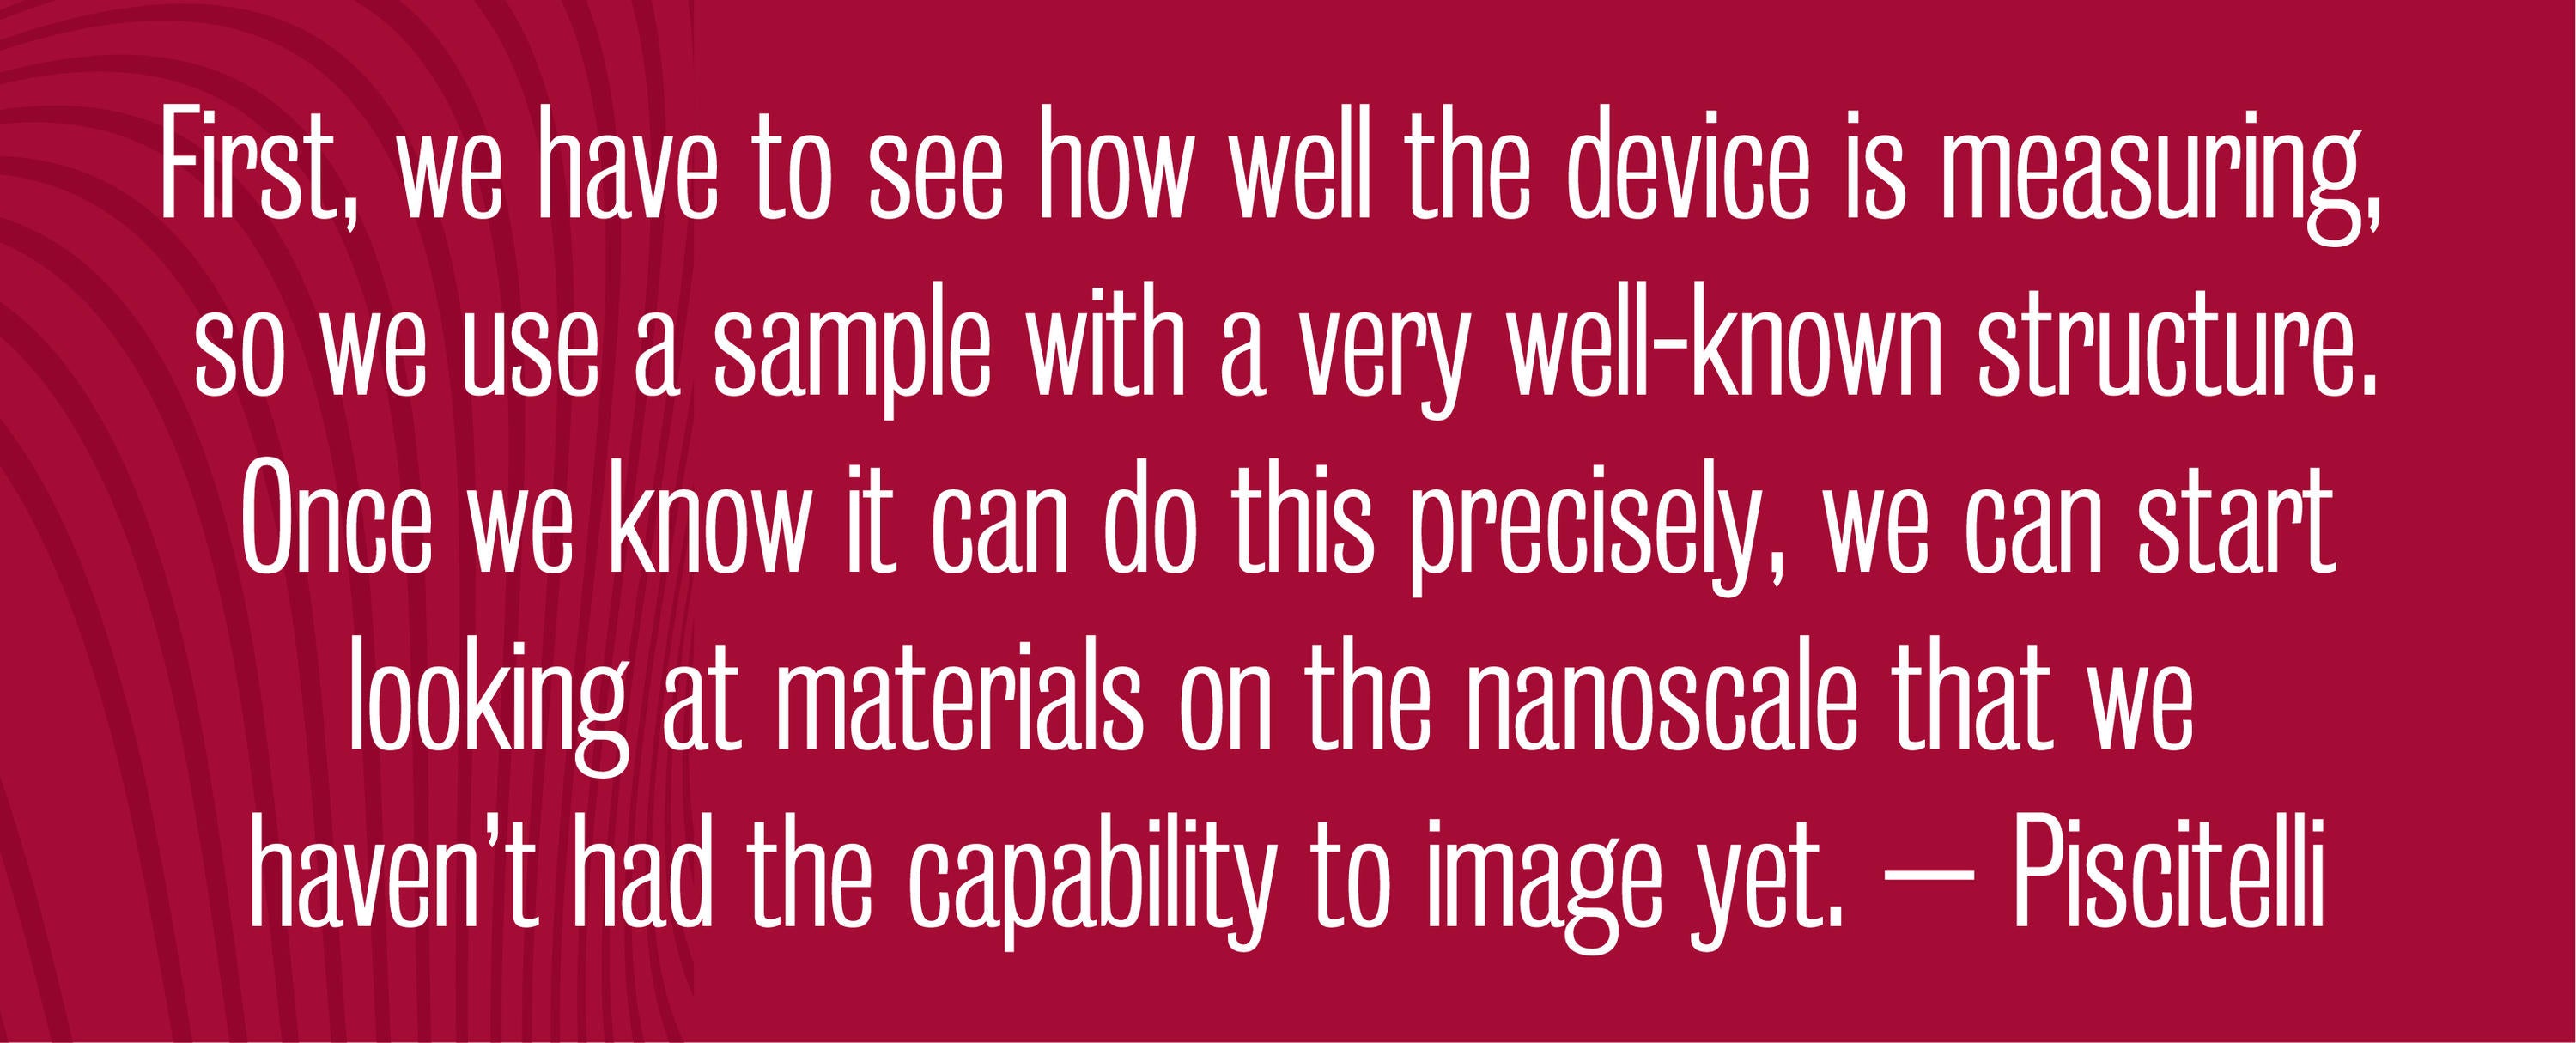 Quote - First, we have to see how well the device is measuring, so we use a sample with a very well-known structure. Once we know it can do this precisely, we can start looking at materials on the nanoscale that we haven’t had the capability to image yet. – Piscitelli